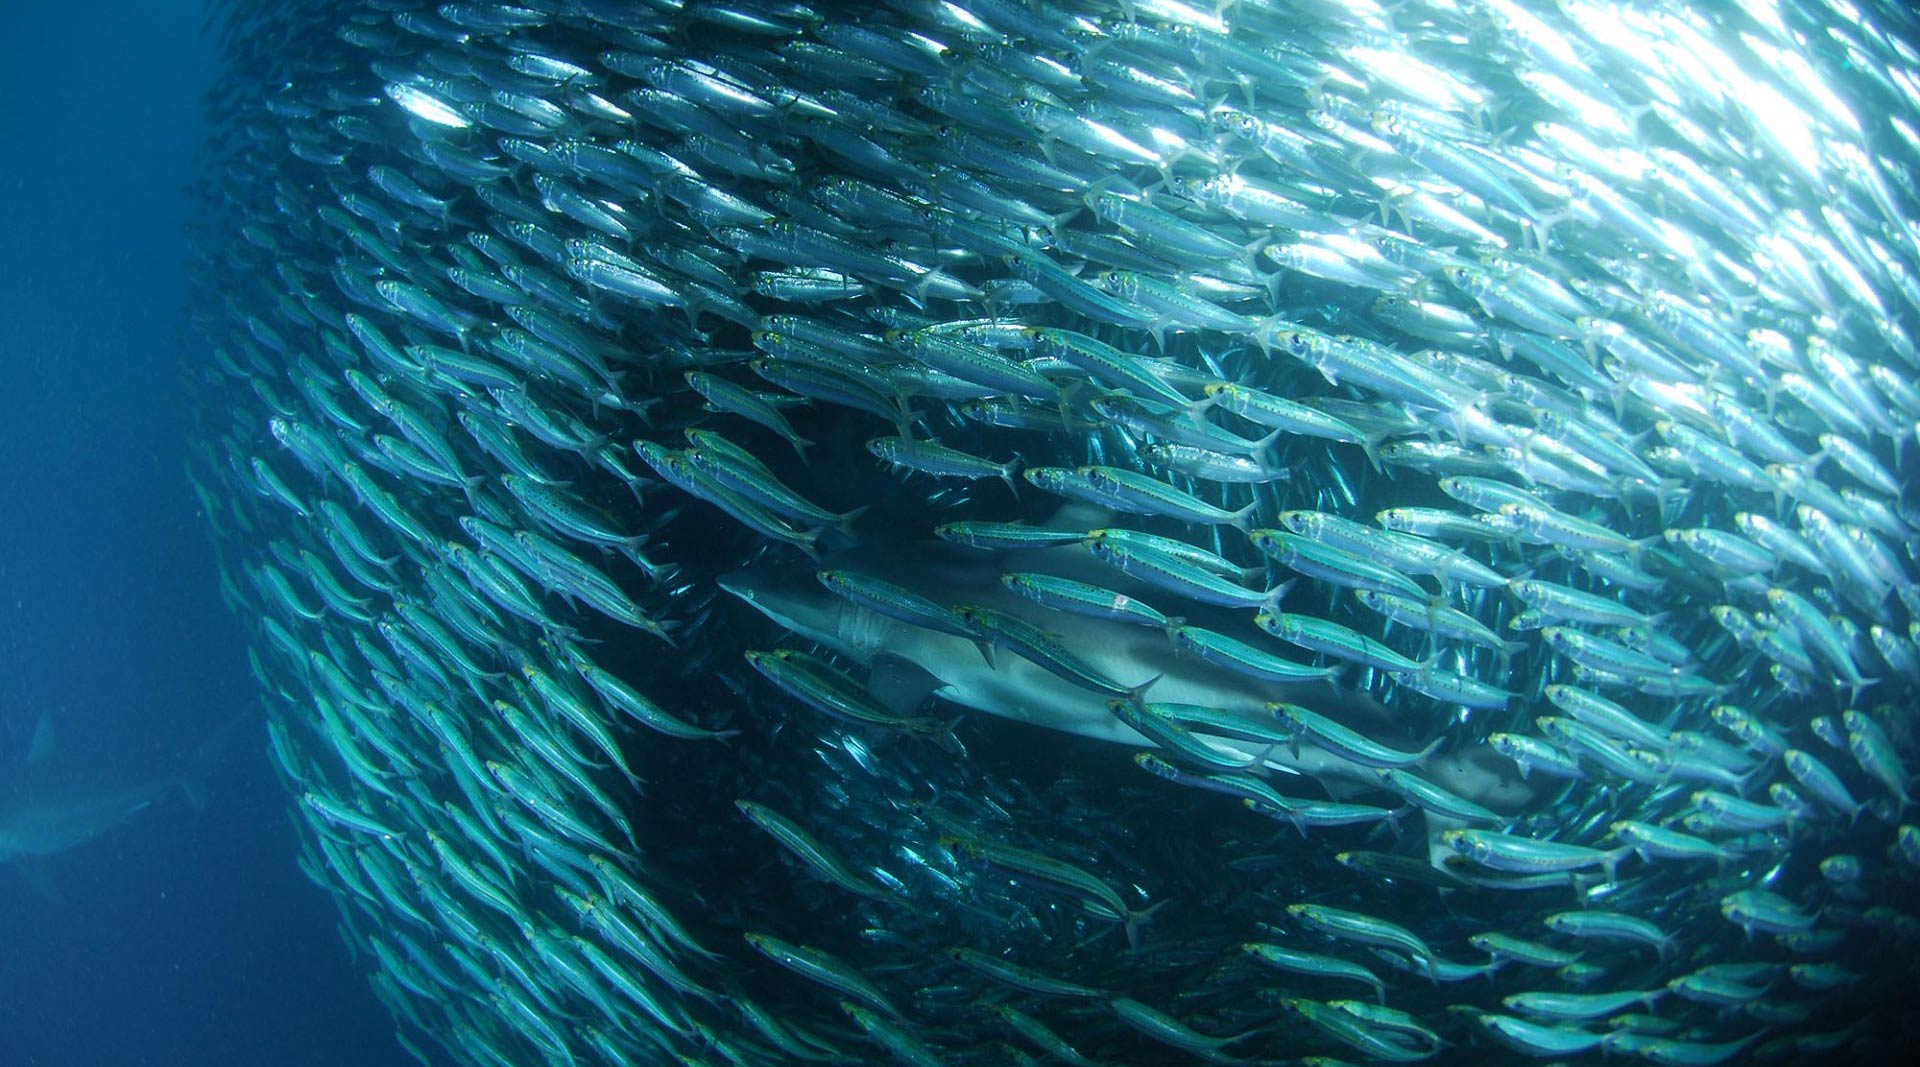 Sardines in the water